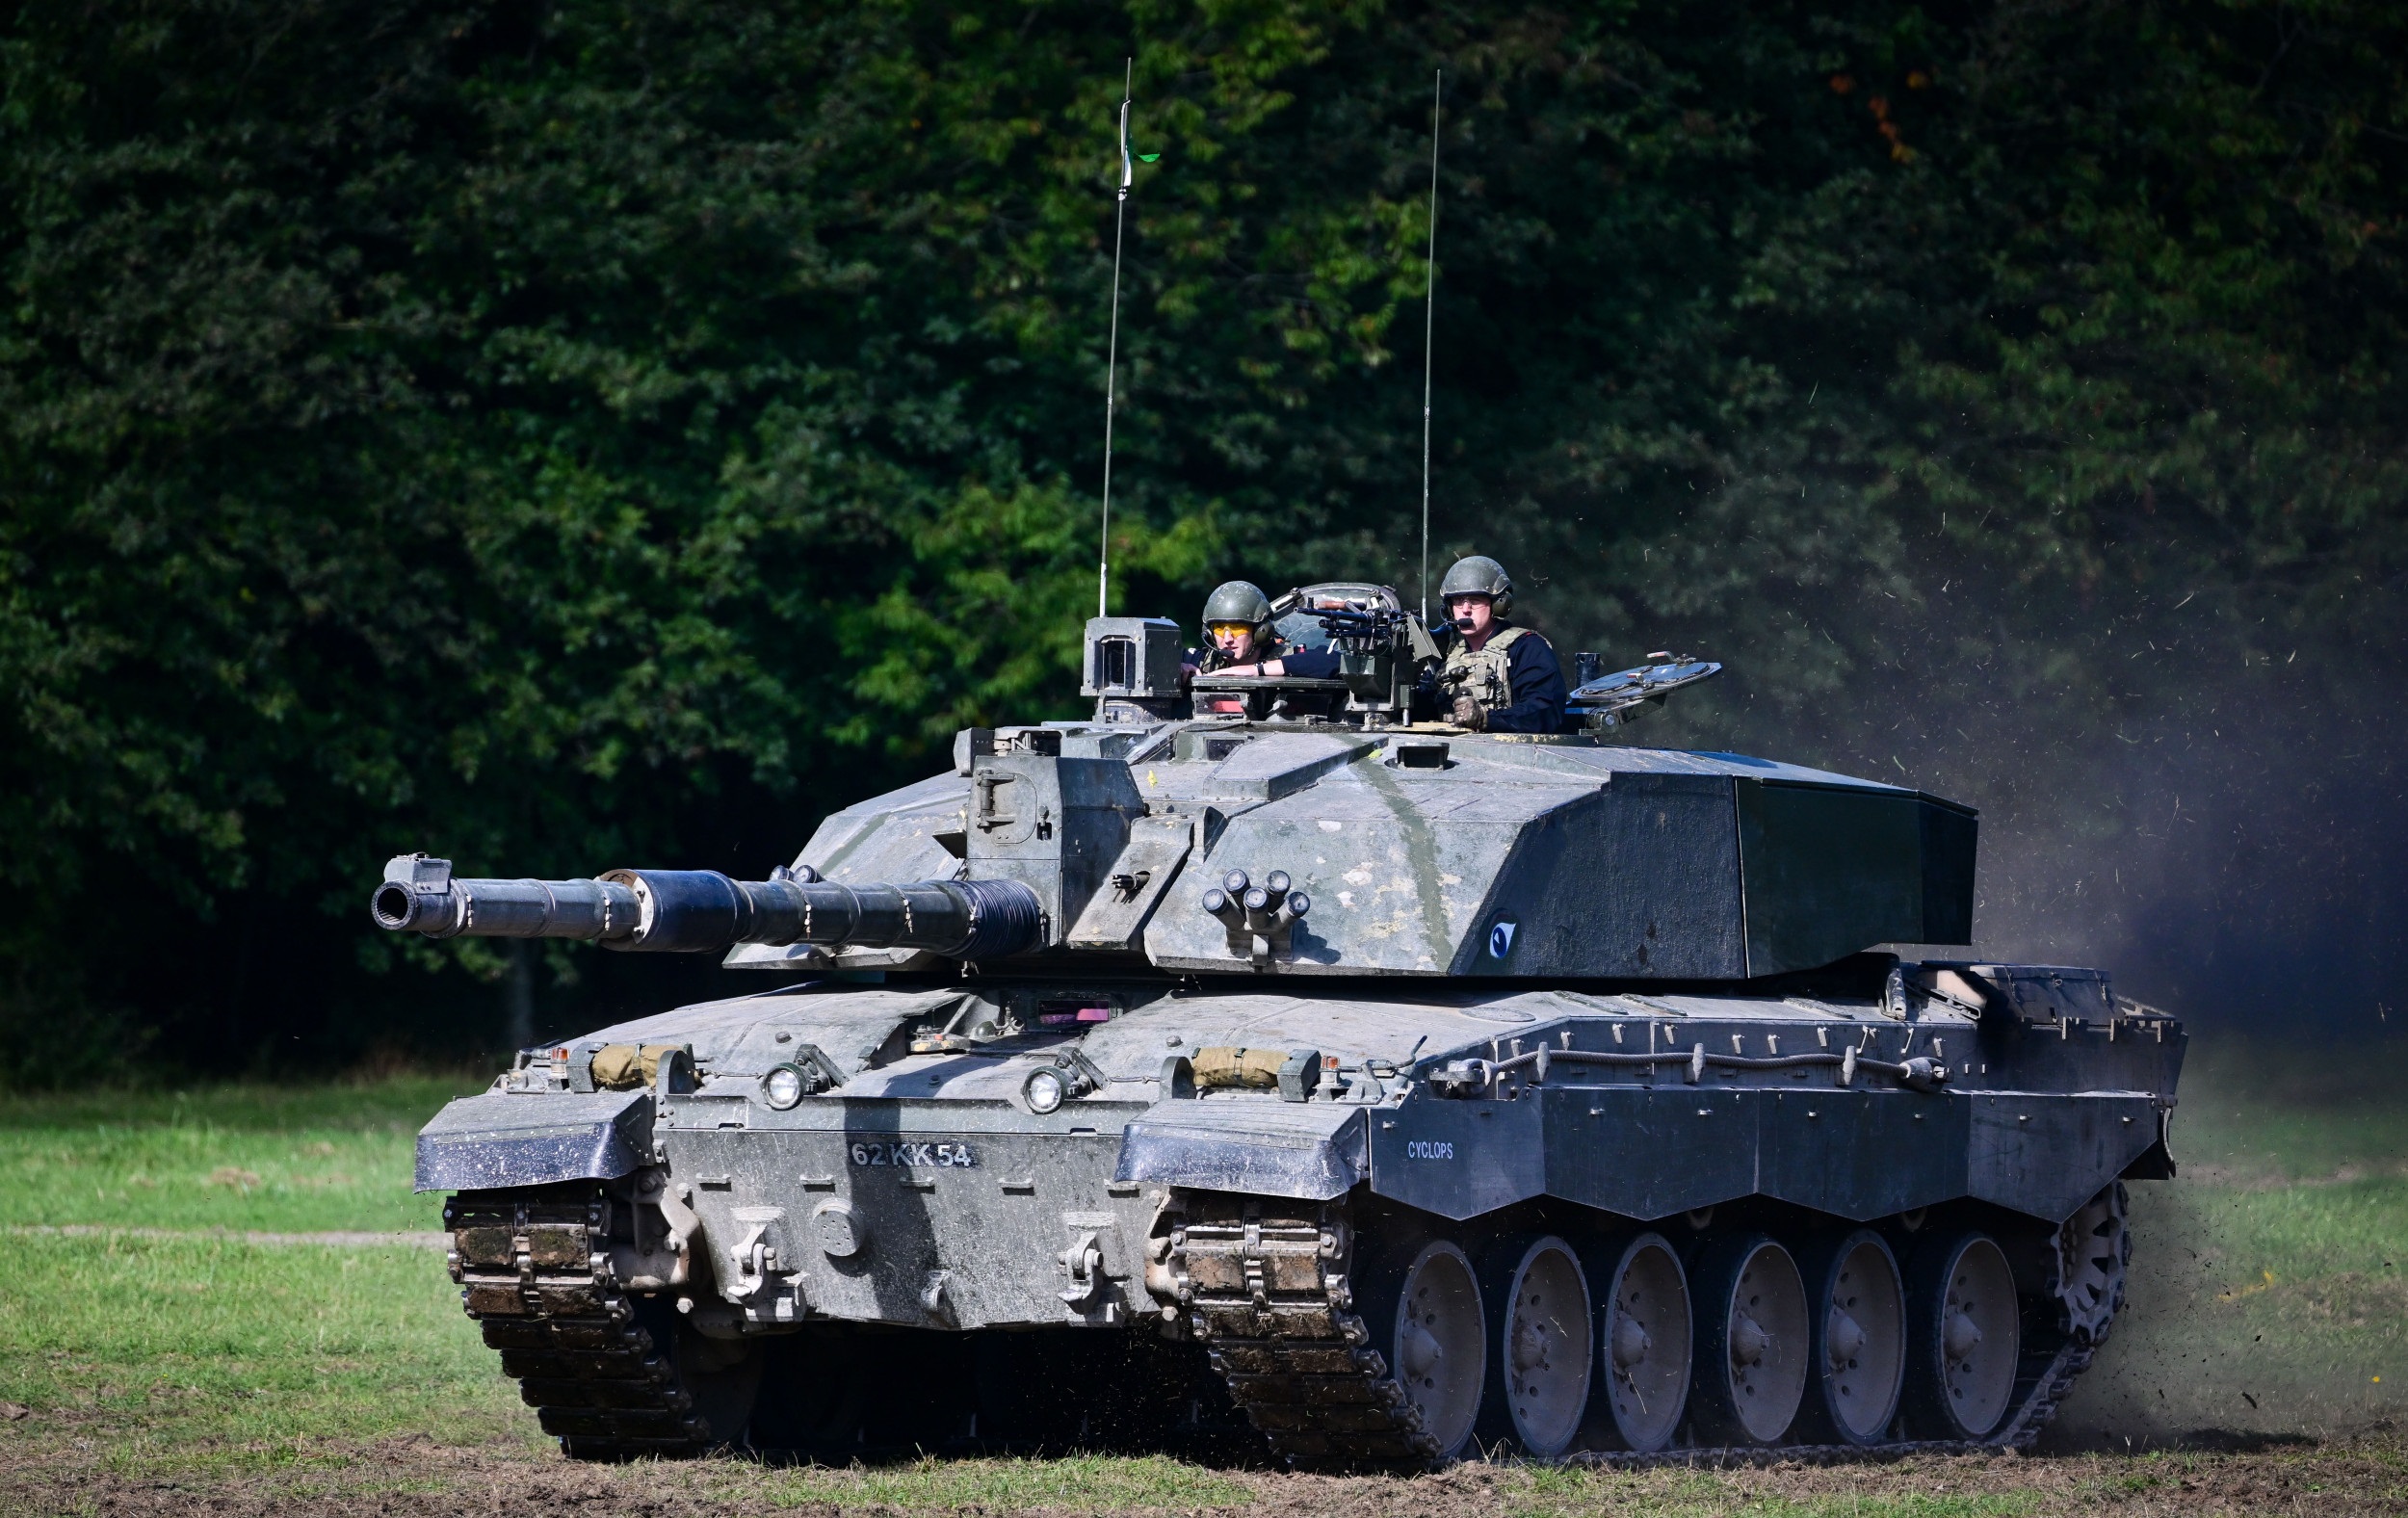 On January 16, Great Britain may announce the provision of Challenger 2 tanks to Ukraine